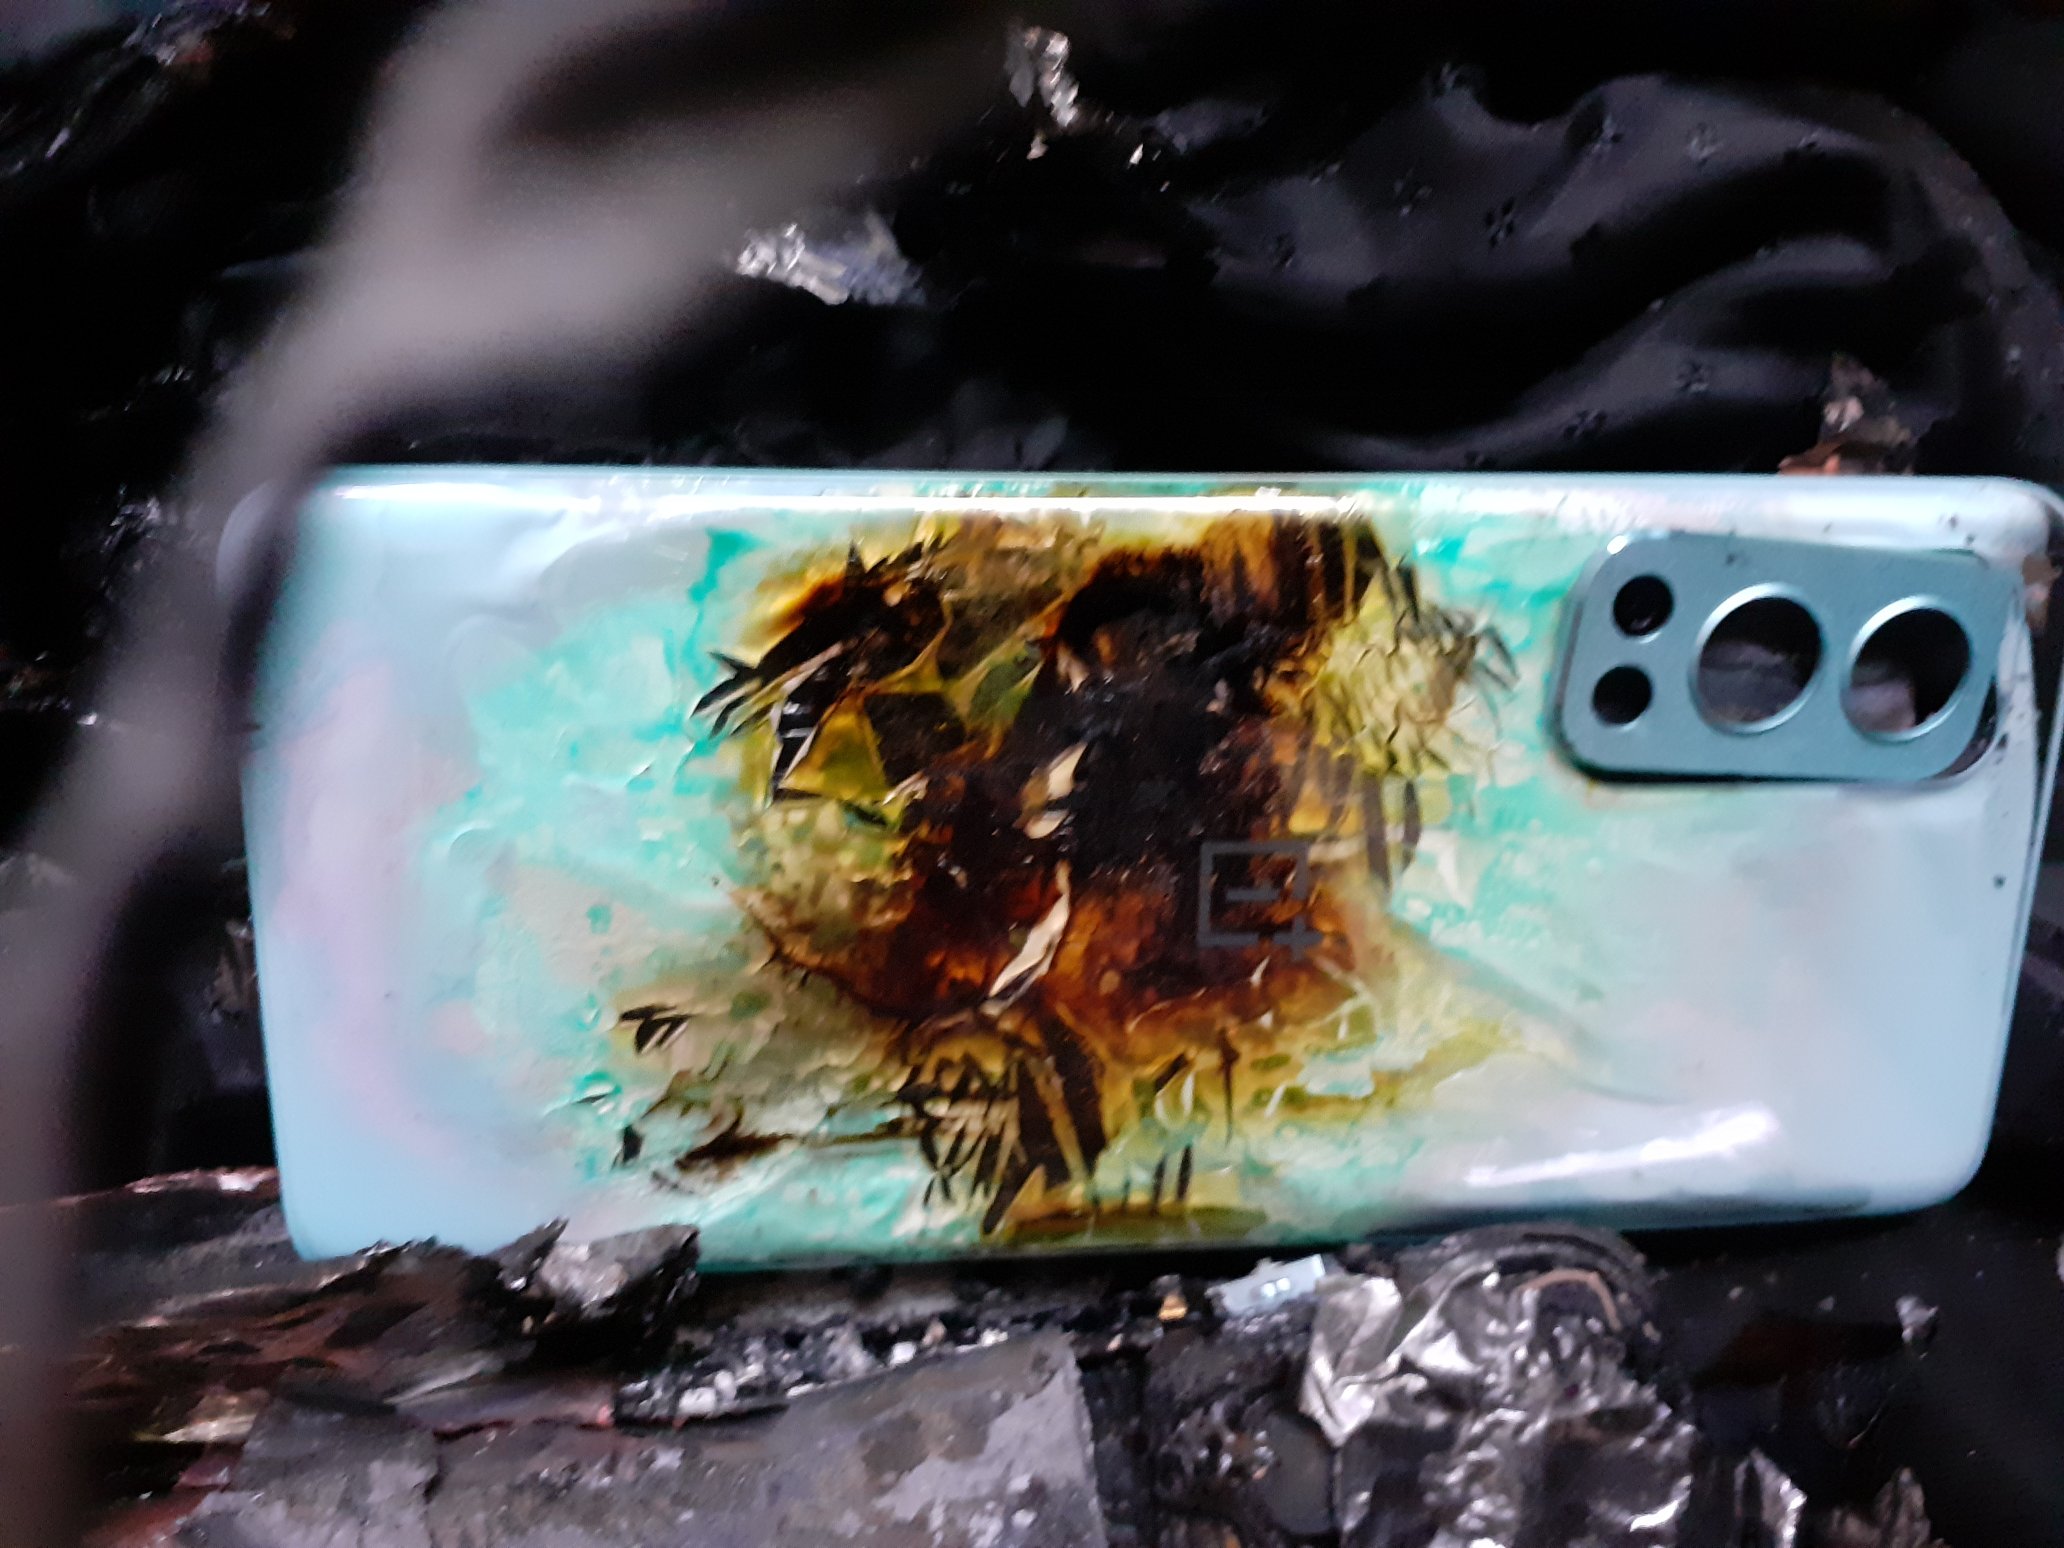 OnePlus Nord 2 caught fire and exploded